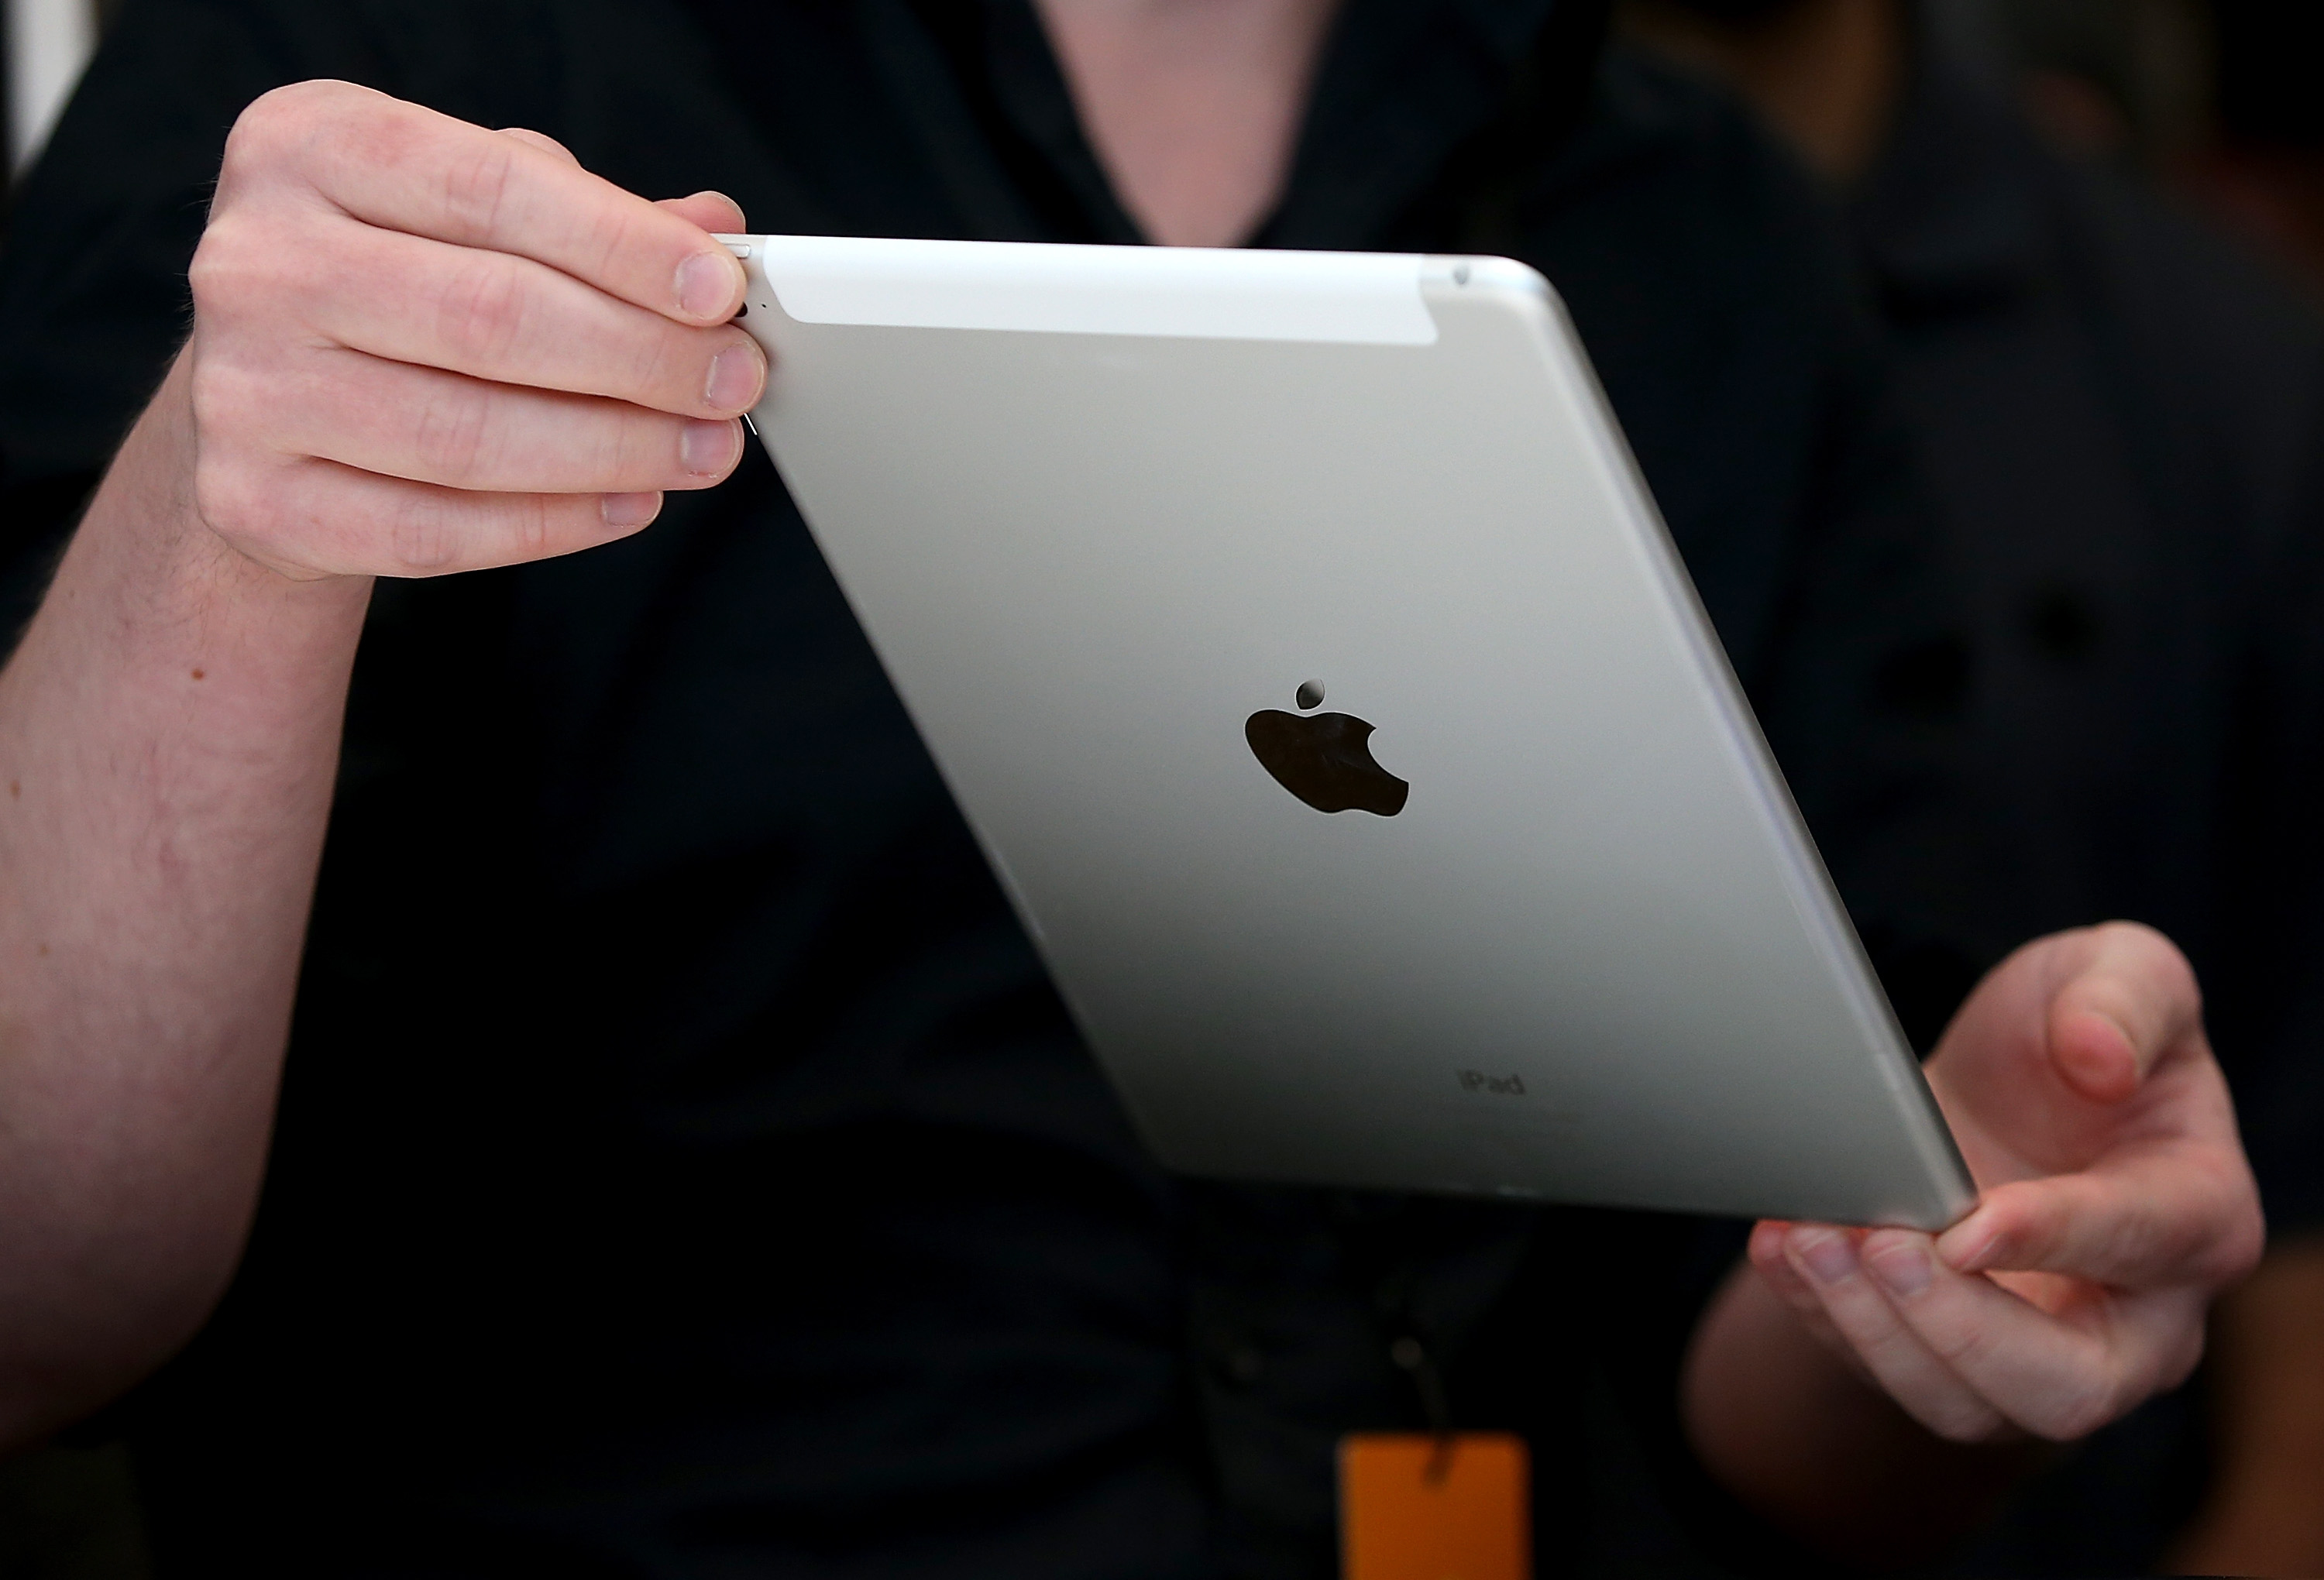 An attendee inspects new iPad Air 2 during an Apple special event on Oct. 16, 2014 in Cupertino, Calif. (Justin Sullivan—Getty Images)